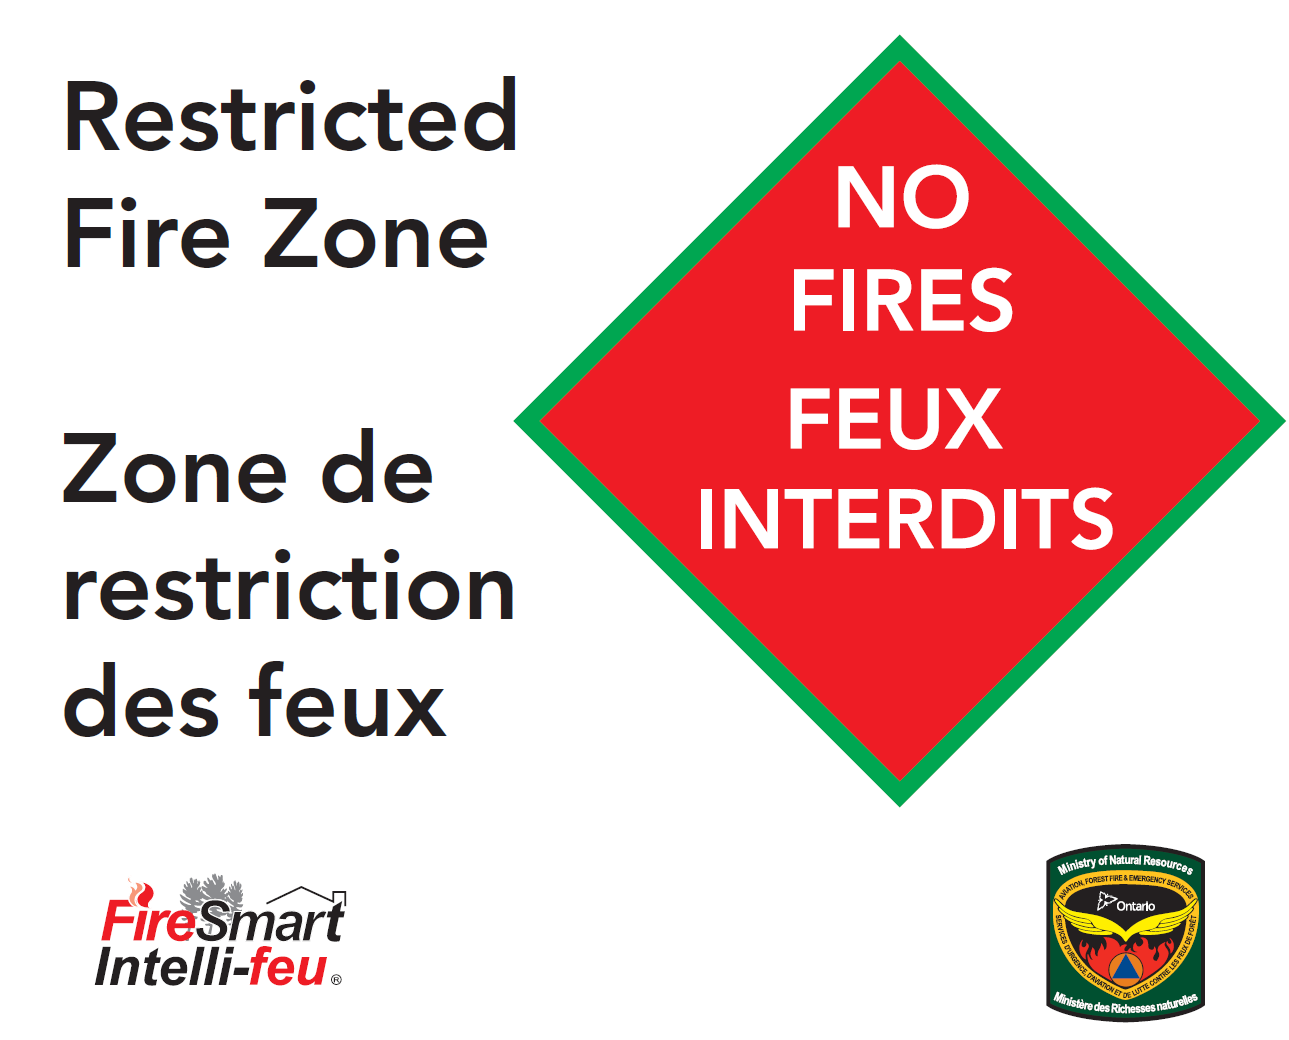 Restricted Fire Zone Declared